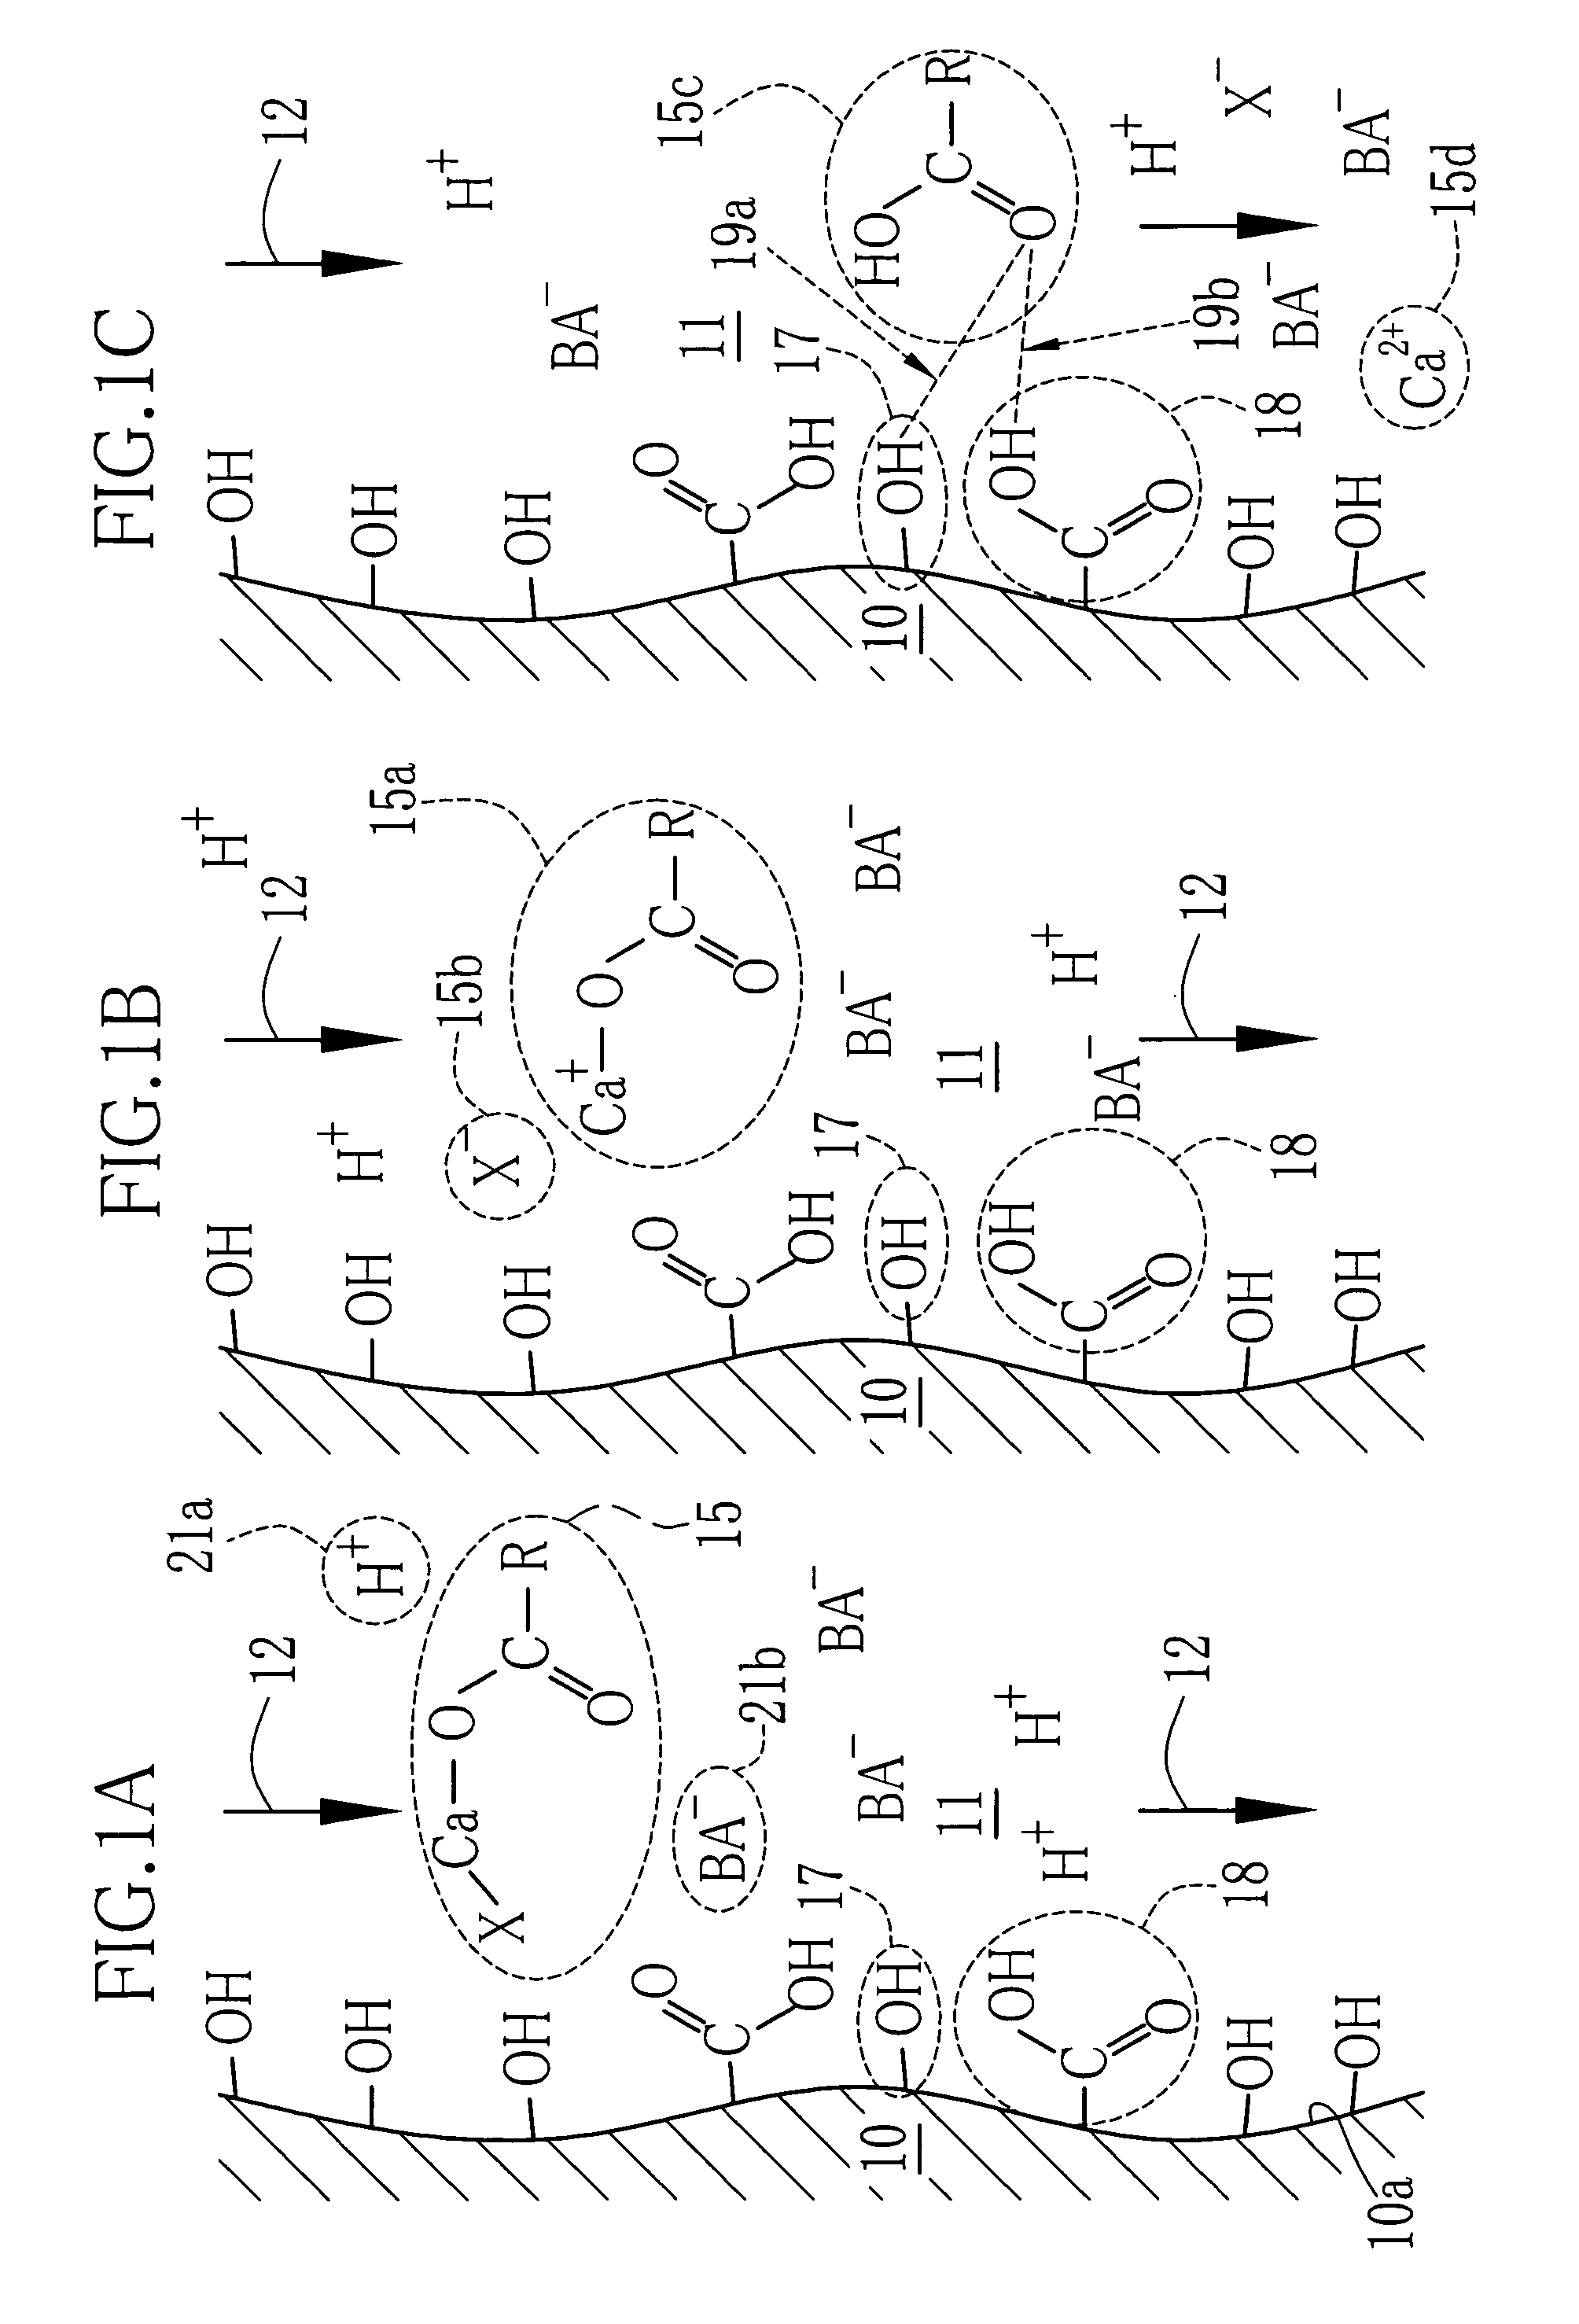 Methods for filtrating and producing polymer solution, and for preparing solvent